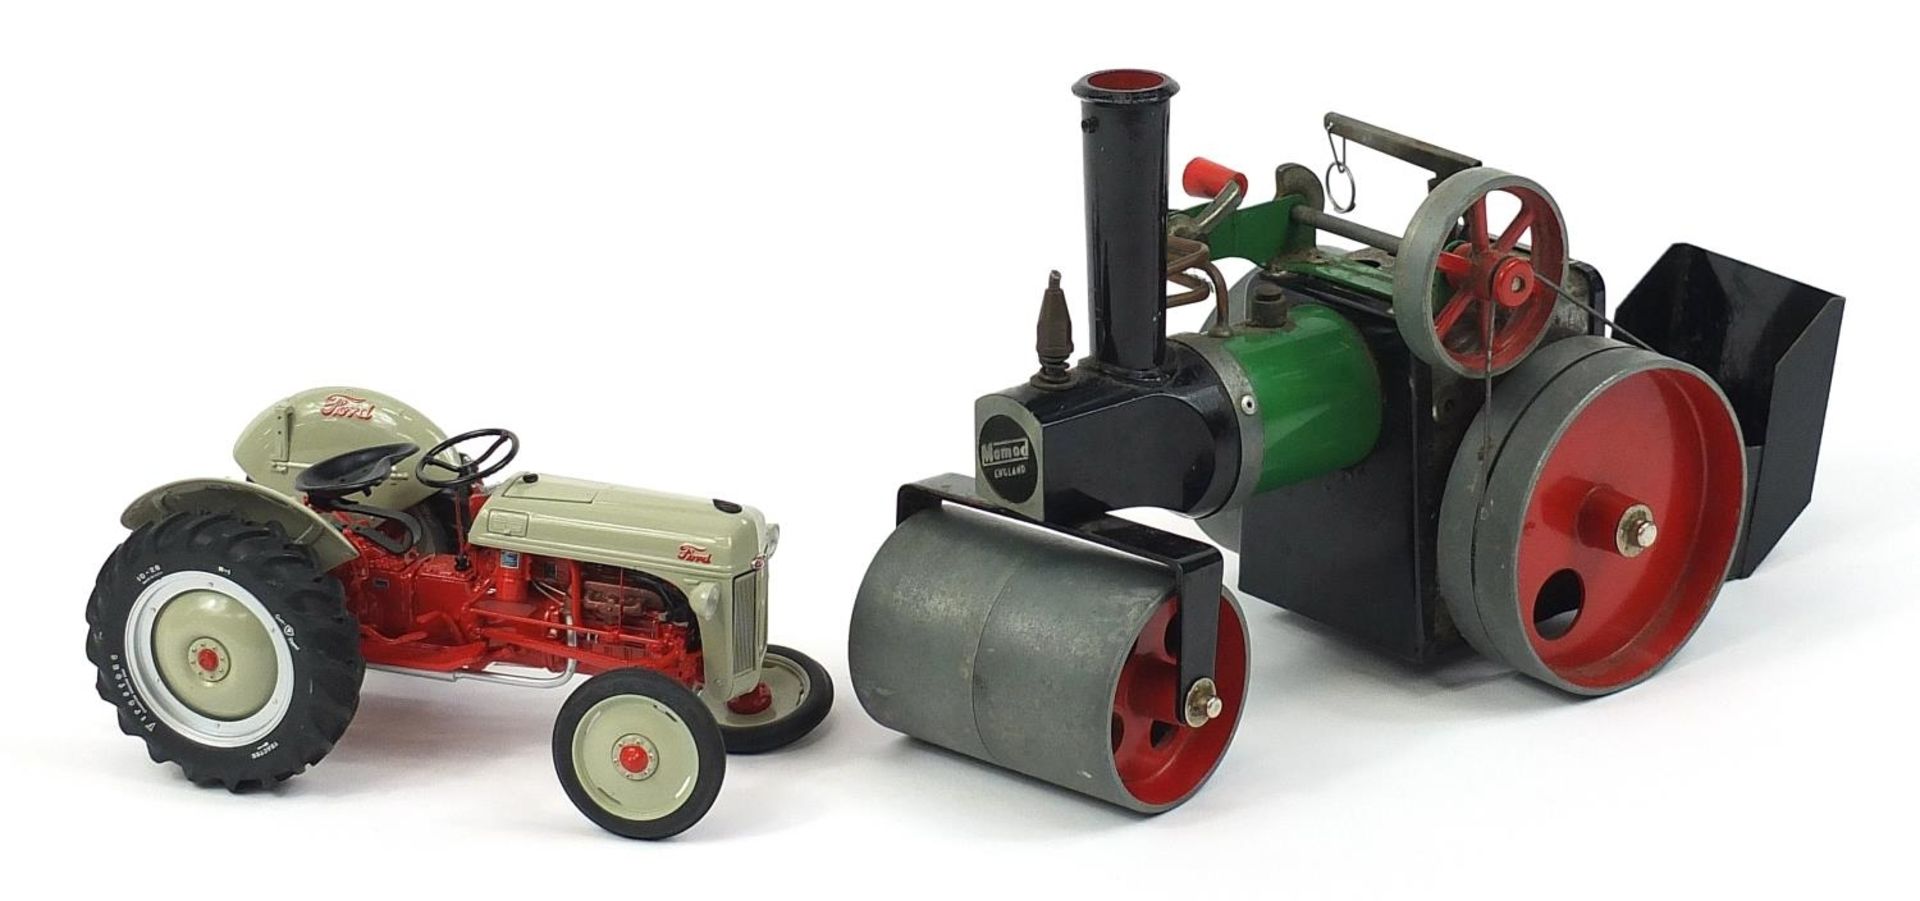 Mamod steam engine and a Danbury mint diecast model 1952 Ford 8N tractor